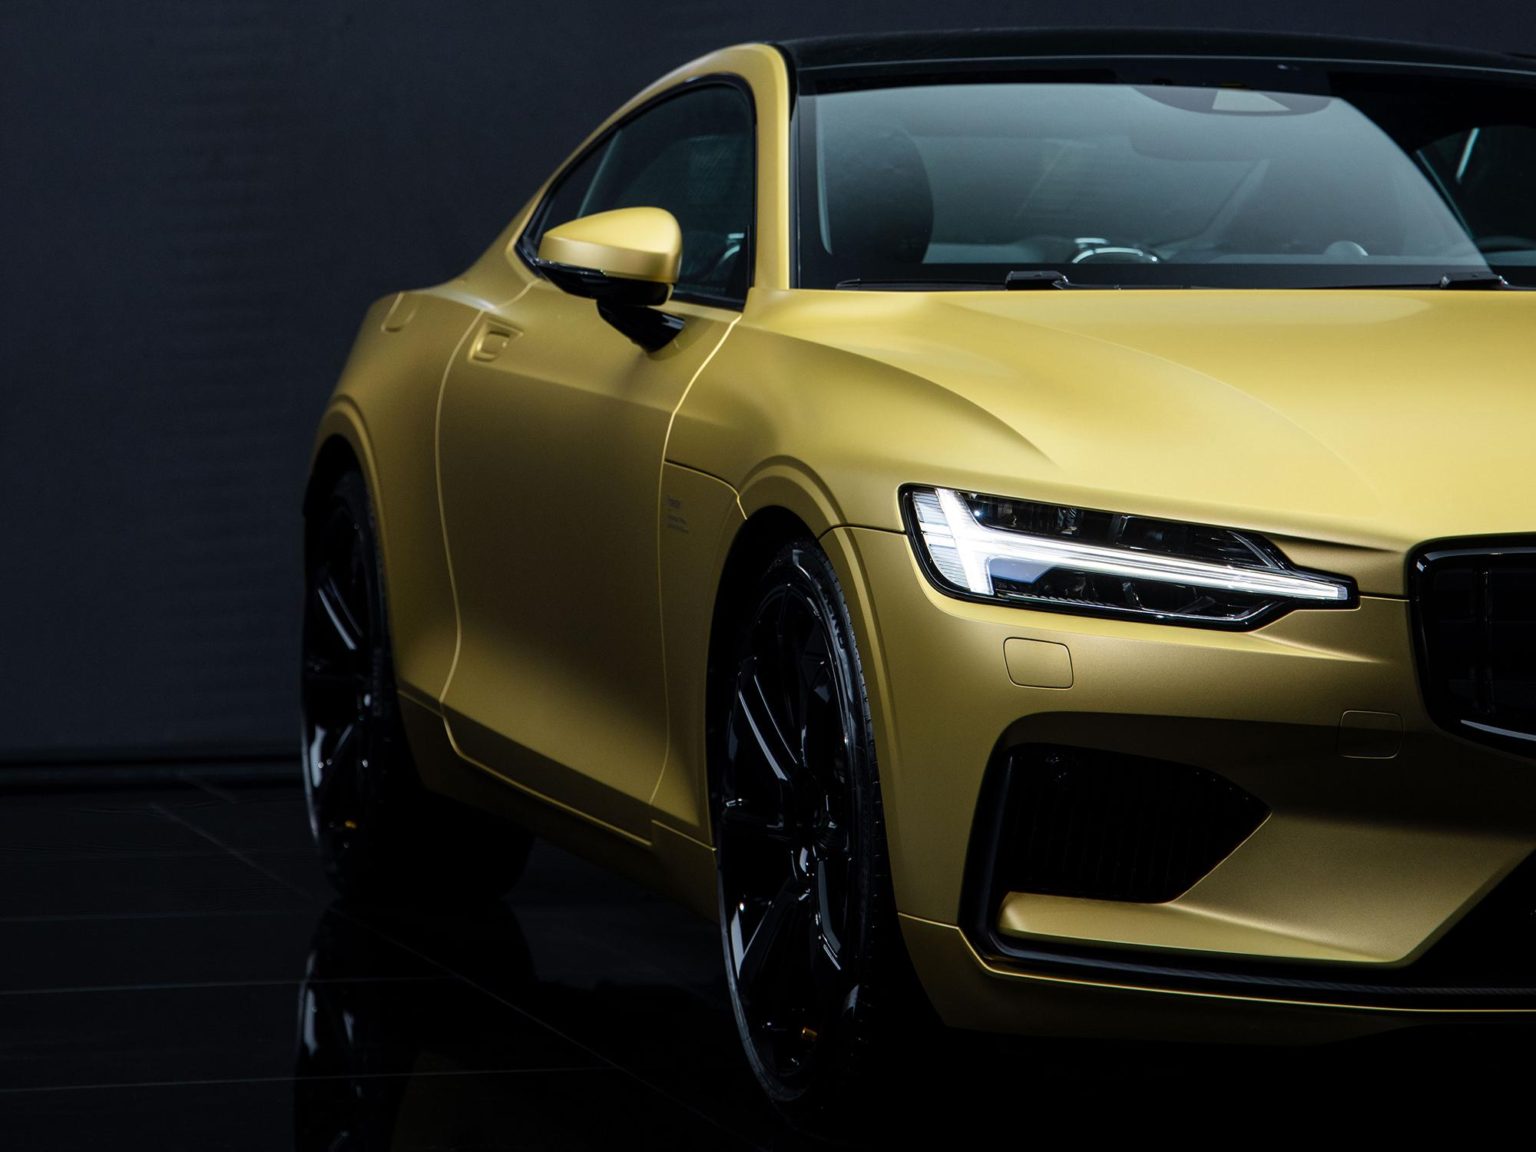 The special edition of the Polestar 1 marks the end of an era.